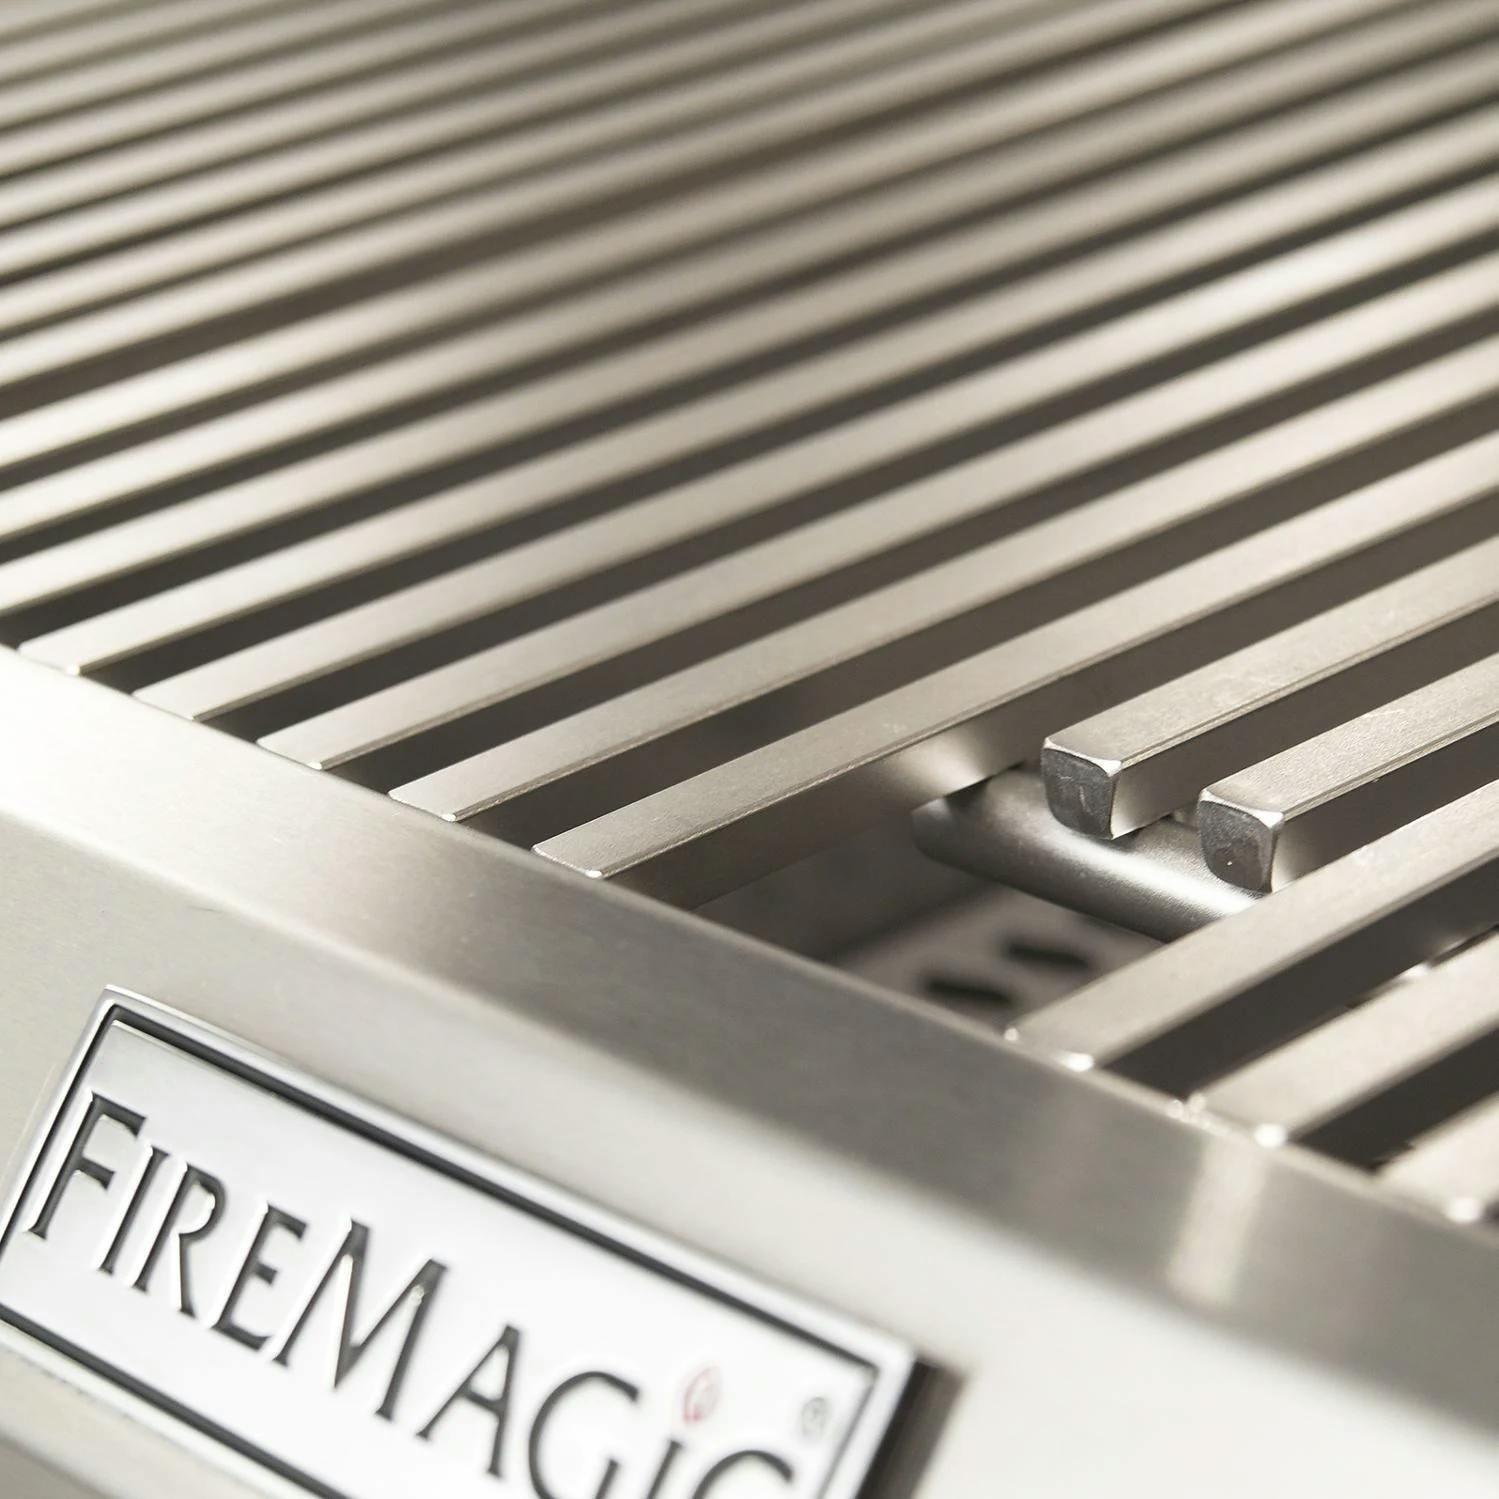 Fire Magic Choice Built-in Gas Grill with Analog Thermometer · 30 in. · Natural Gas